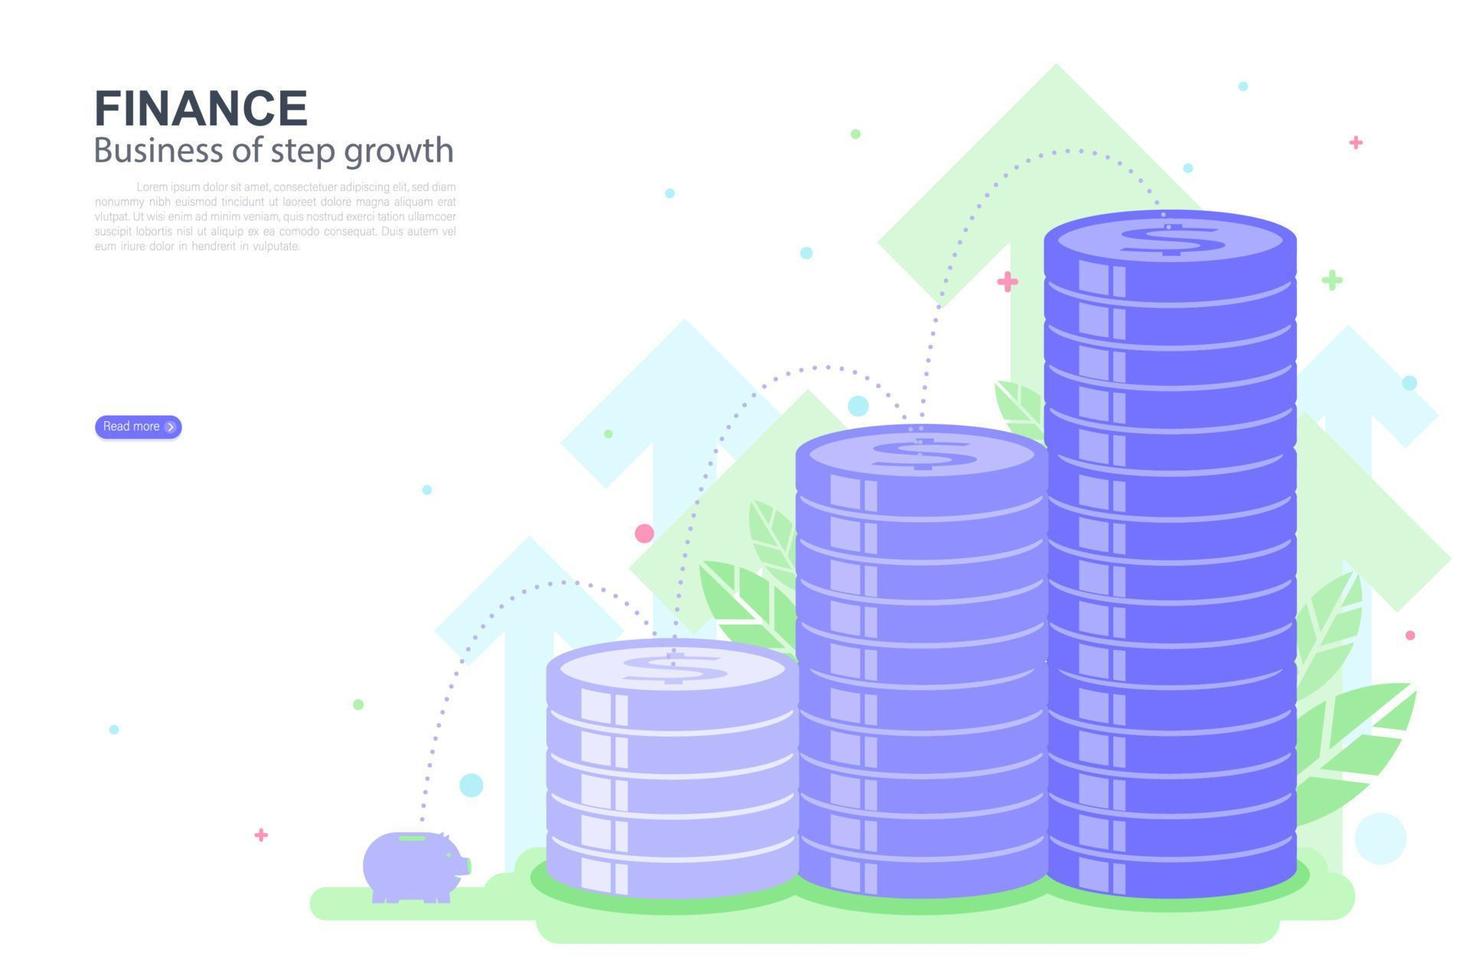 Finance investment. concept of business of step growth. landing page graphic design website template. Vector illustration